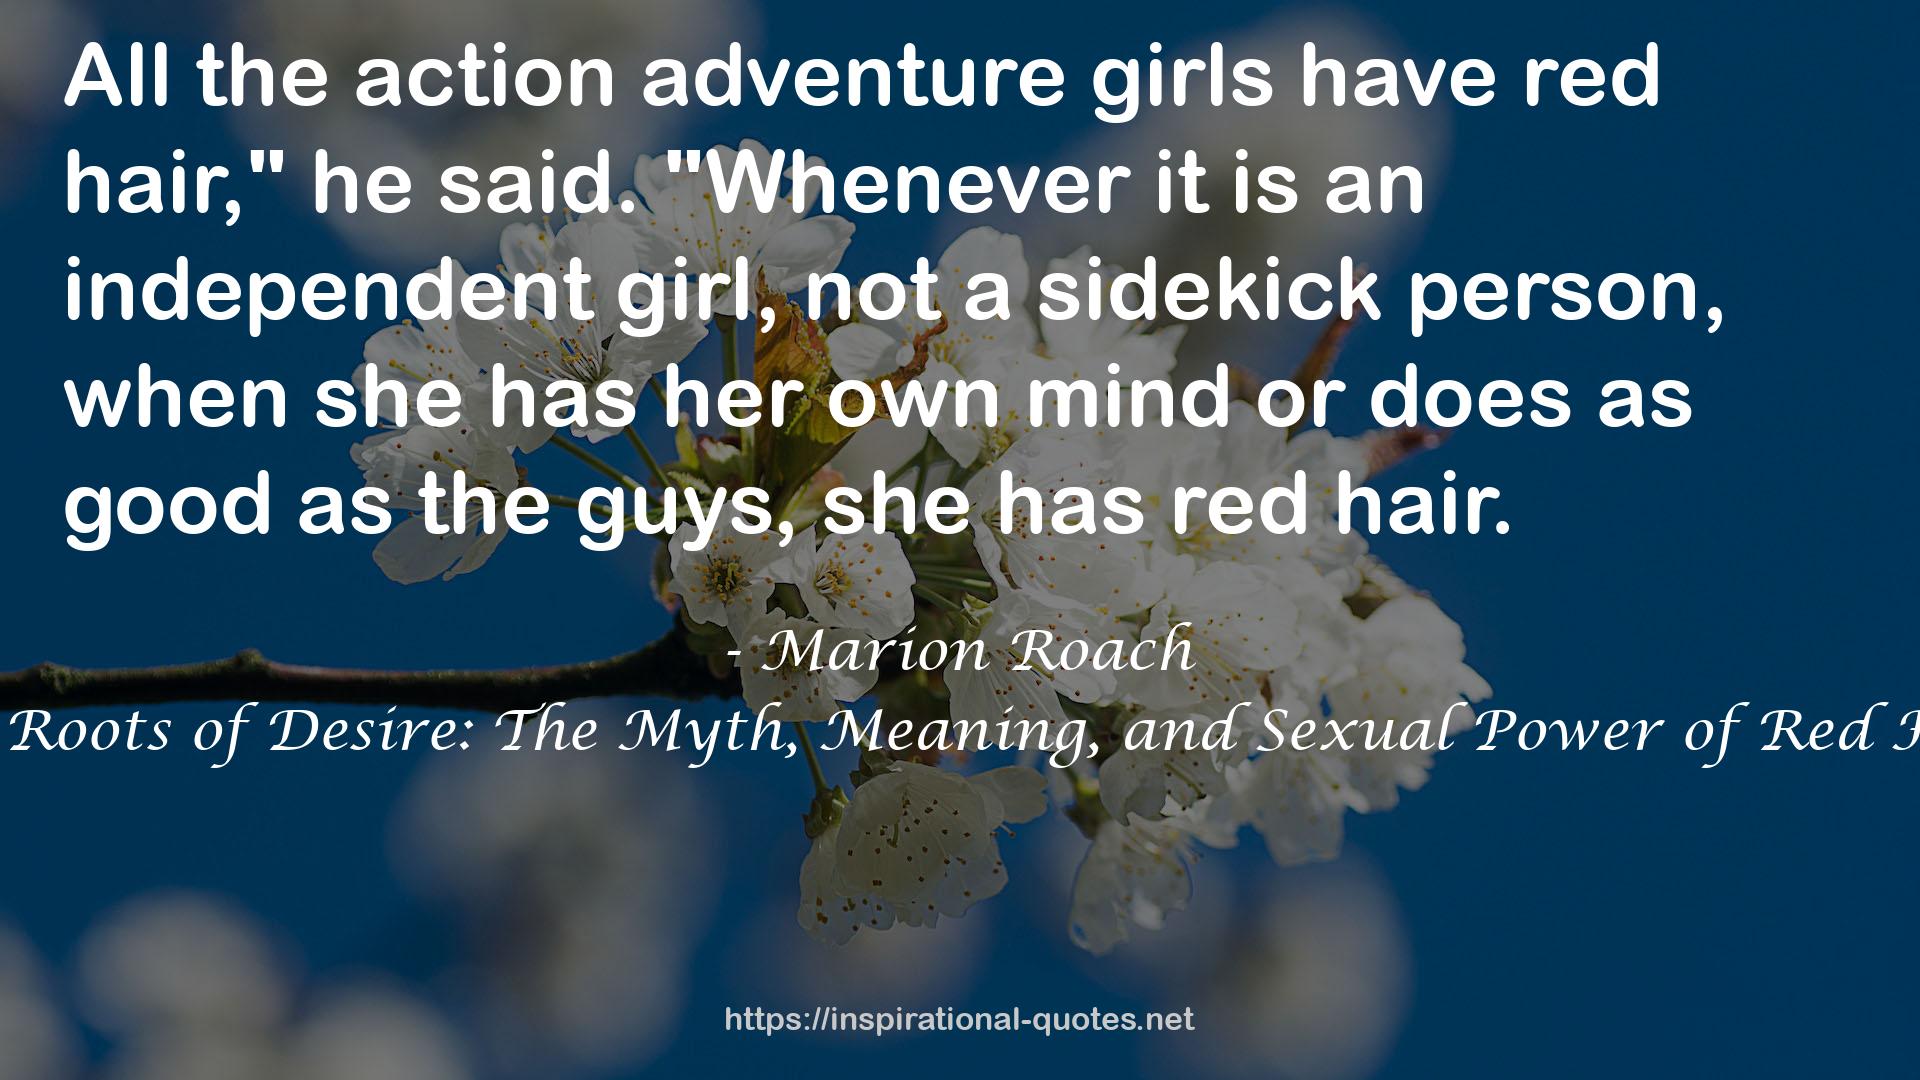 The Roots of Desire: The Myth, Meaning, and Sexual Power of Red Hair QUOTES